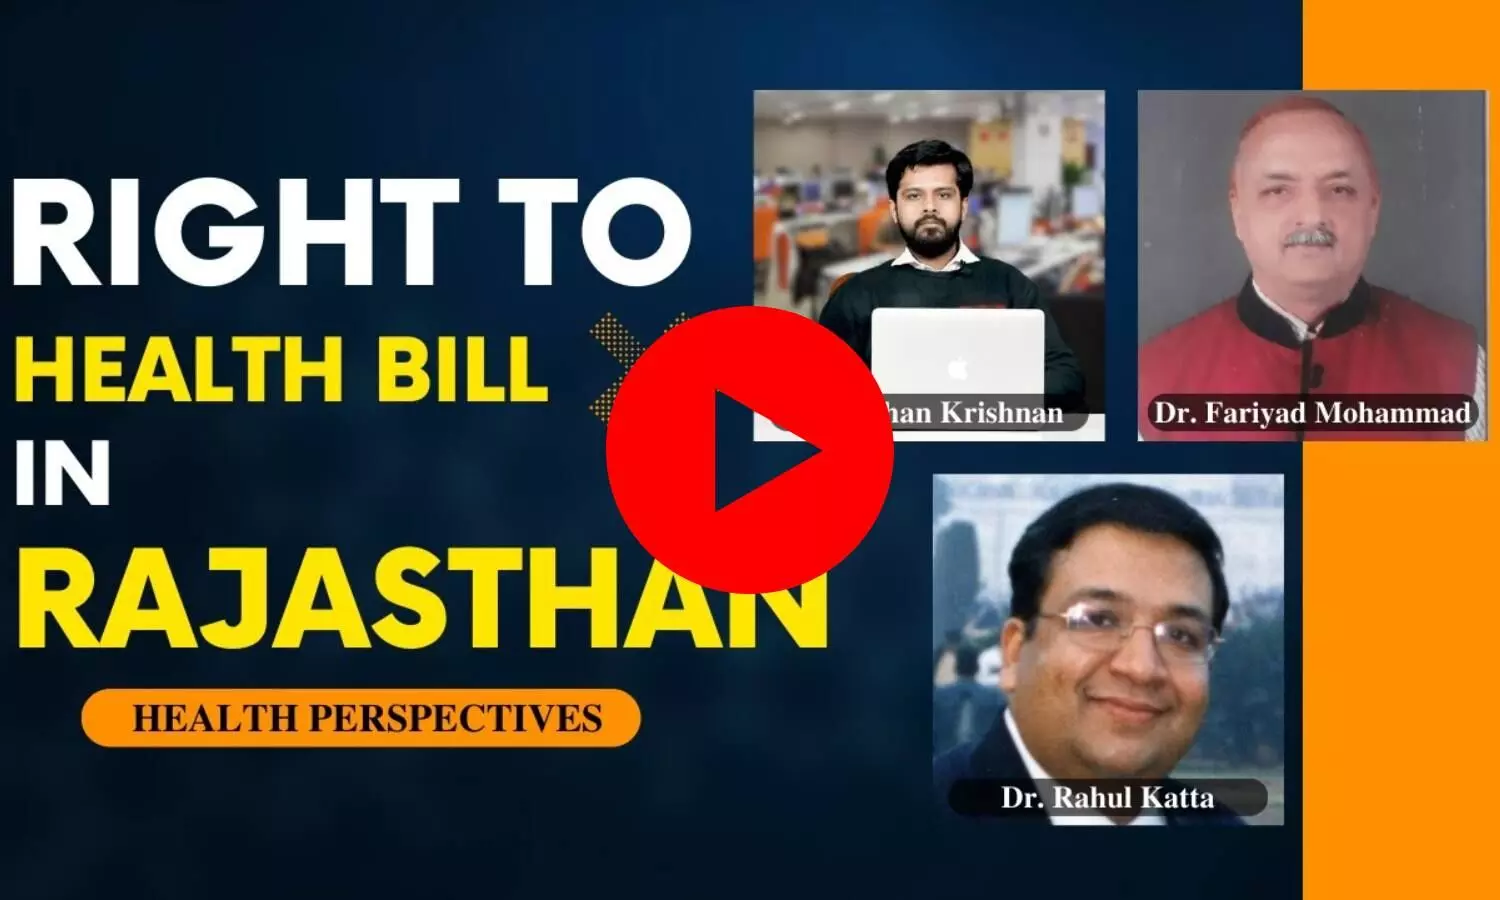 Why is there a fuss over the Rajasthan Right to Health Bill?